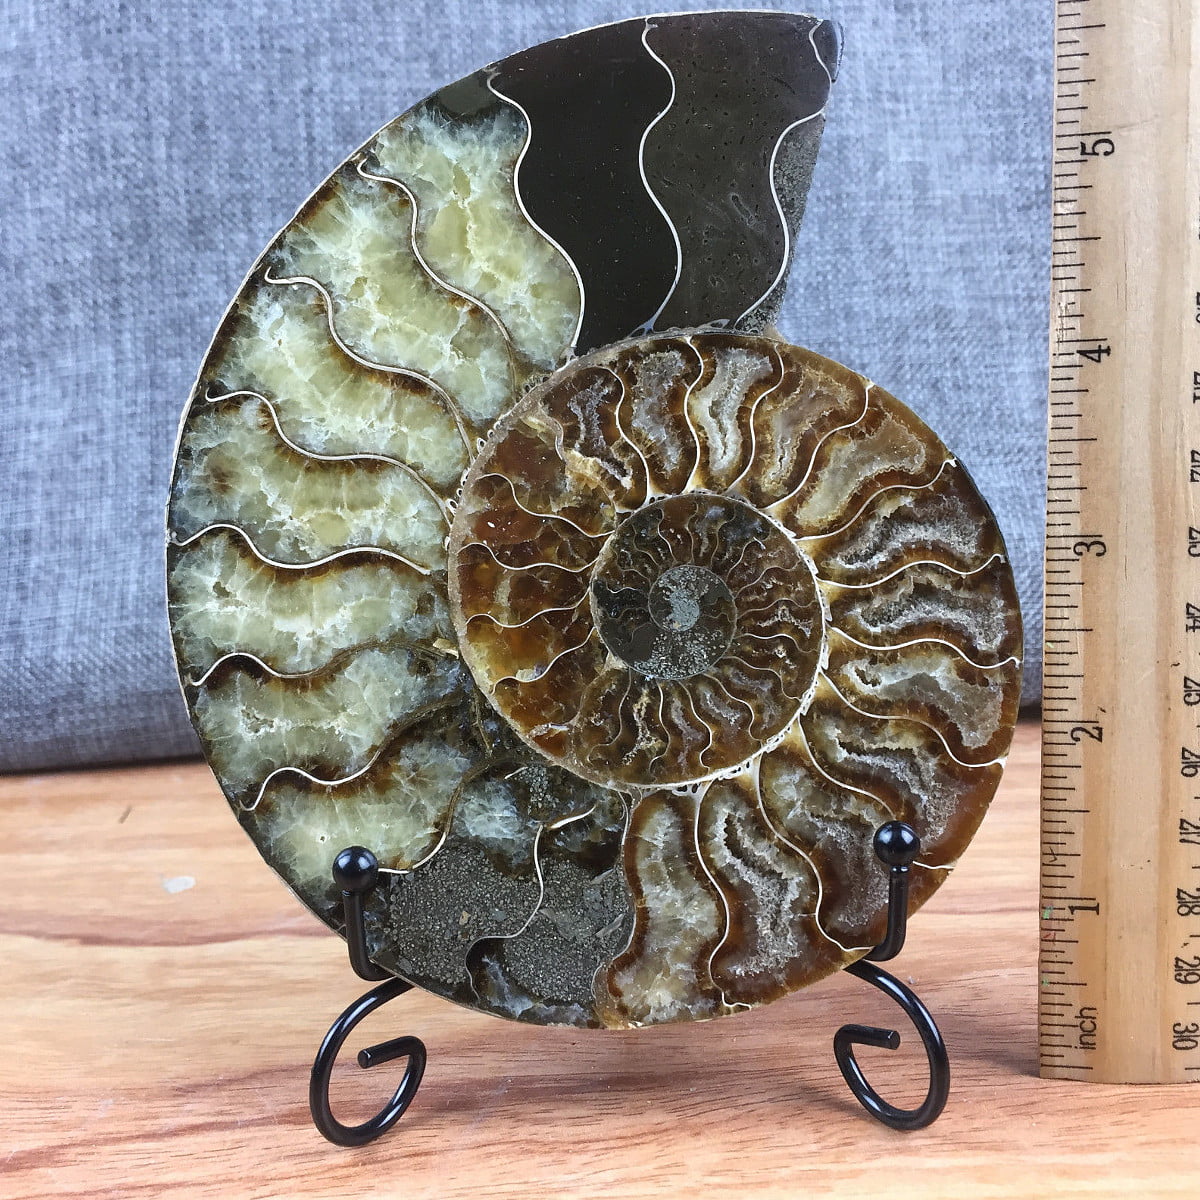 Pair Ammonite Fossil Conch Slice Ammonite Fossil Mineral specimens with Stand 